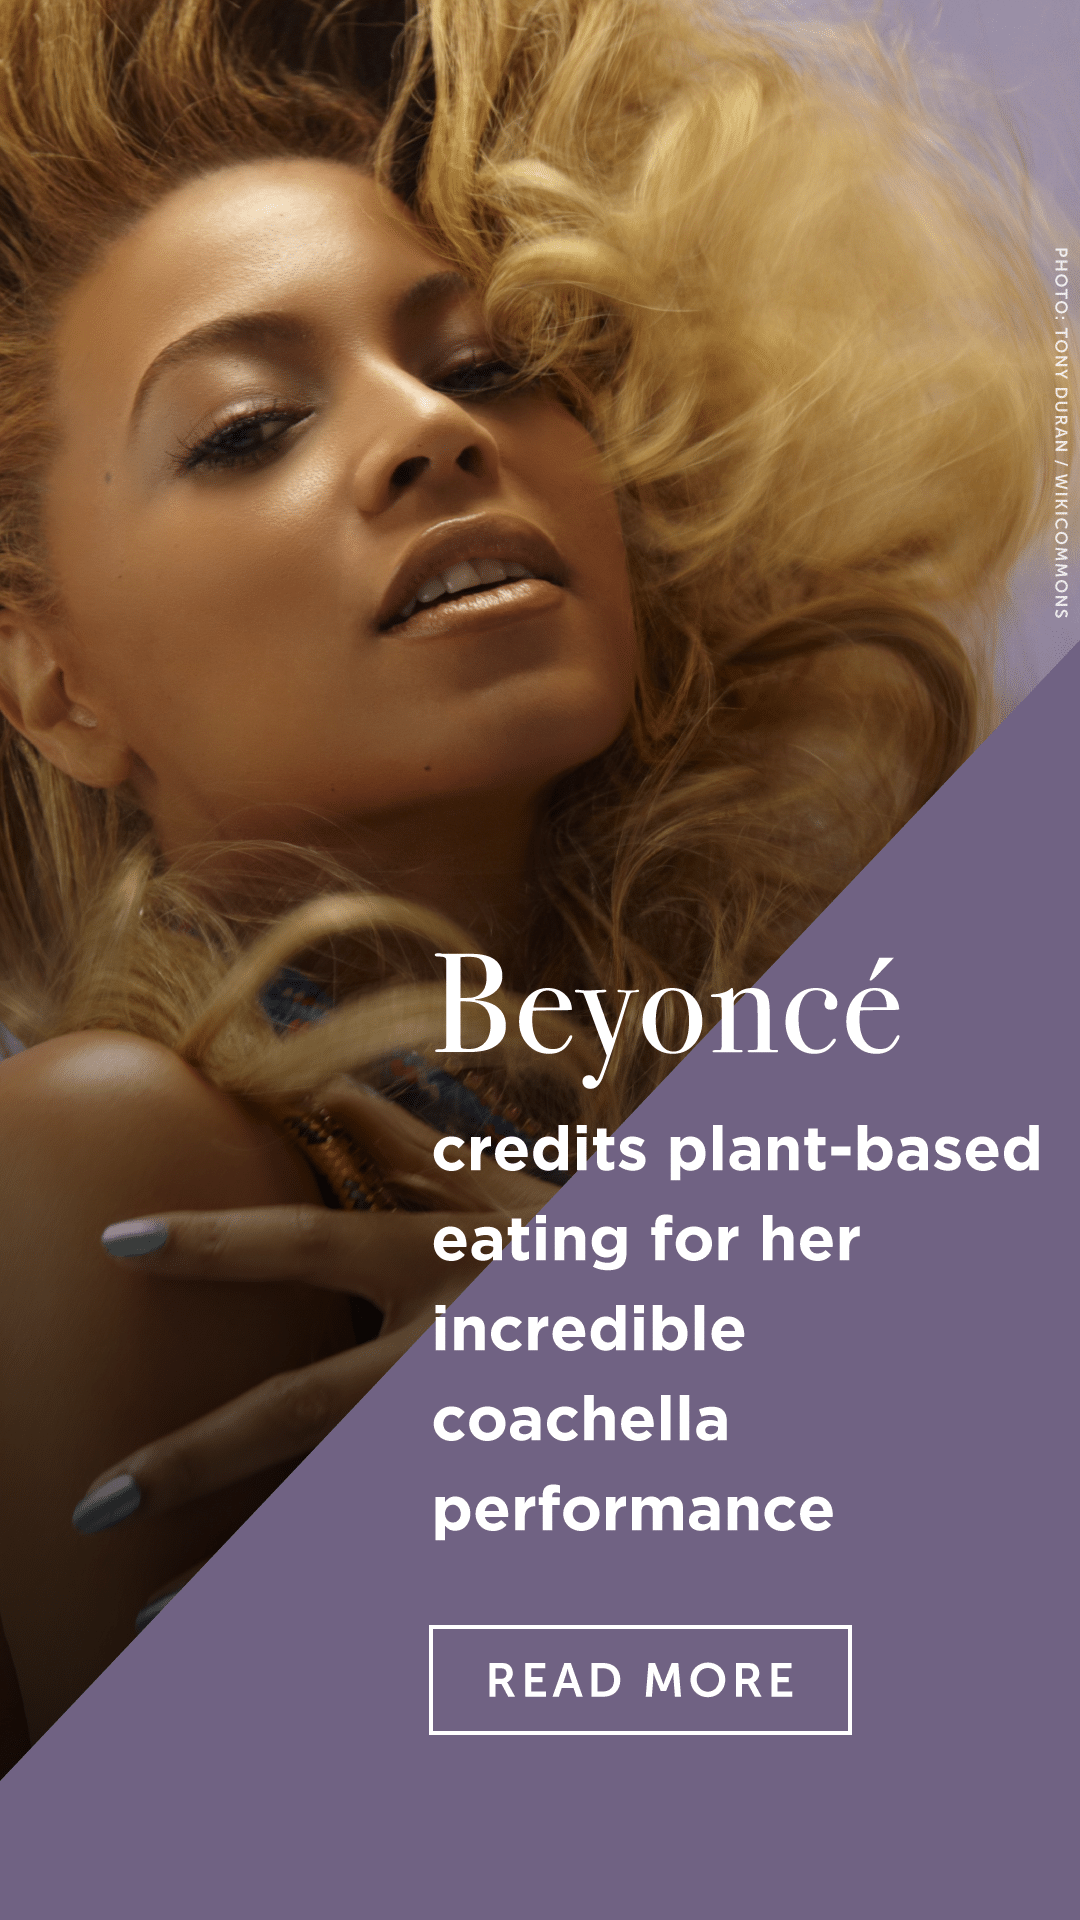 Beyoncé Credits Plant-Based Eating for Her Incredible Coachella Performance